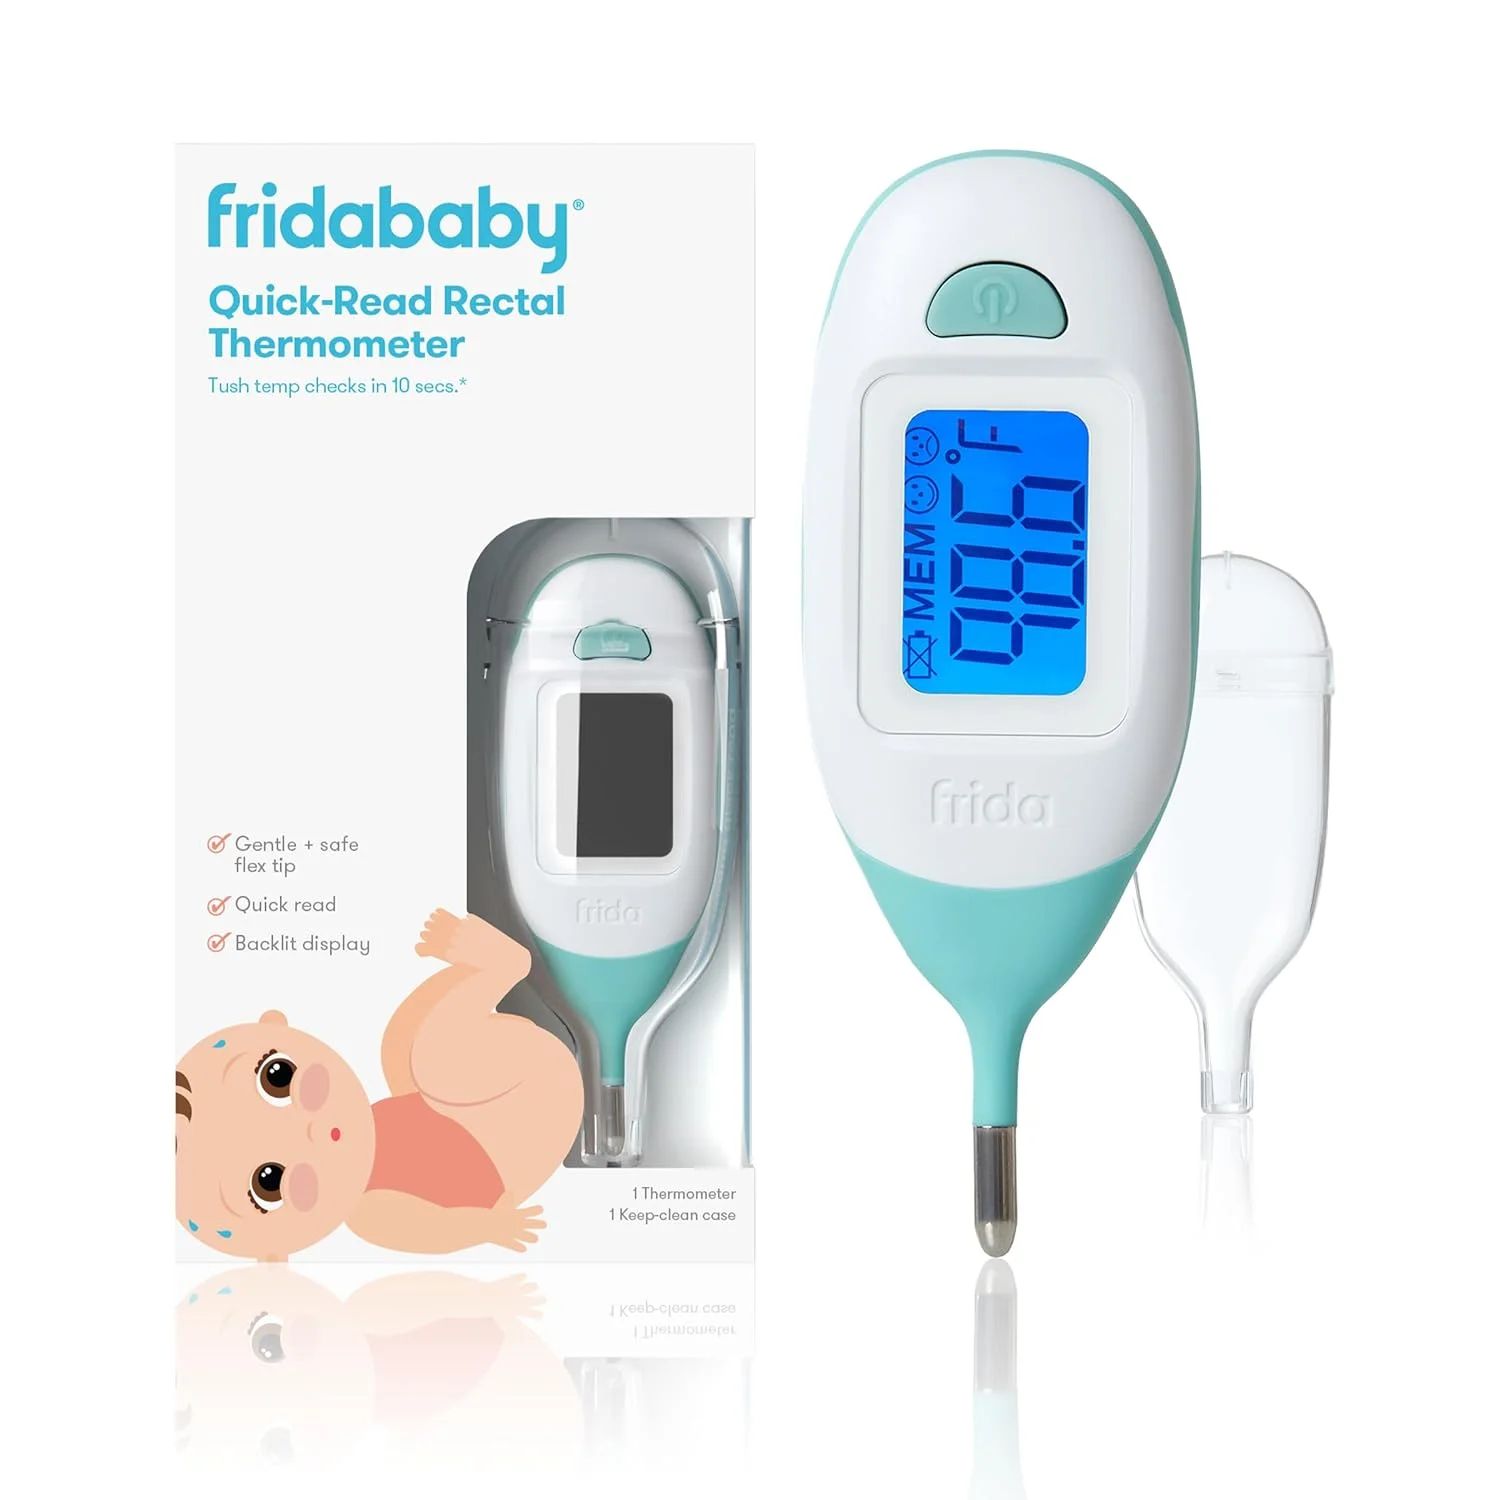 Frida Baby Quick-Read Digital Rectal Thermometer for Accurate Infant Temperature Readings | Walmart (US)